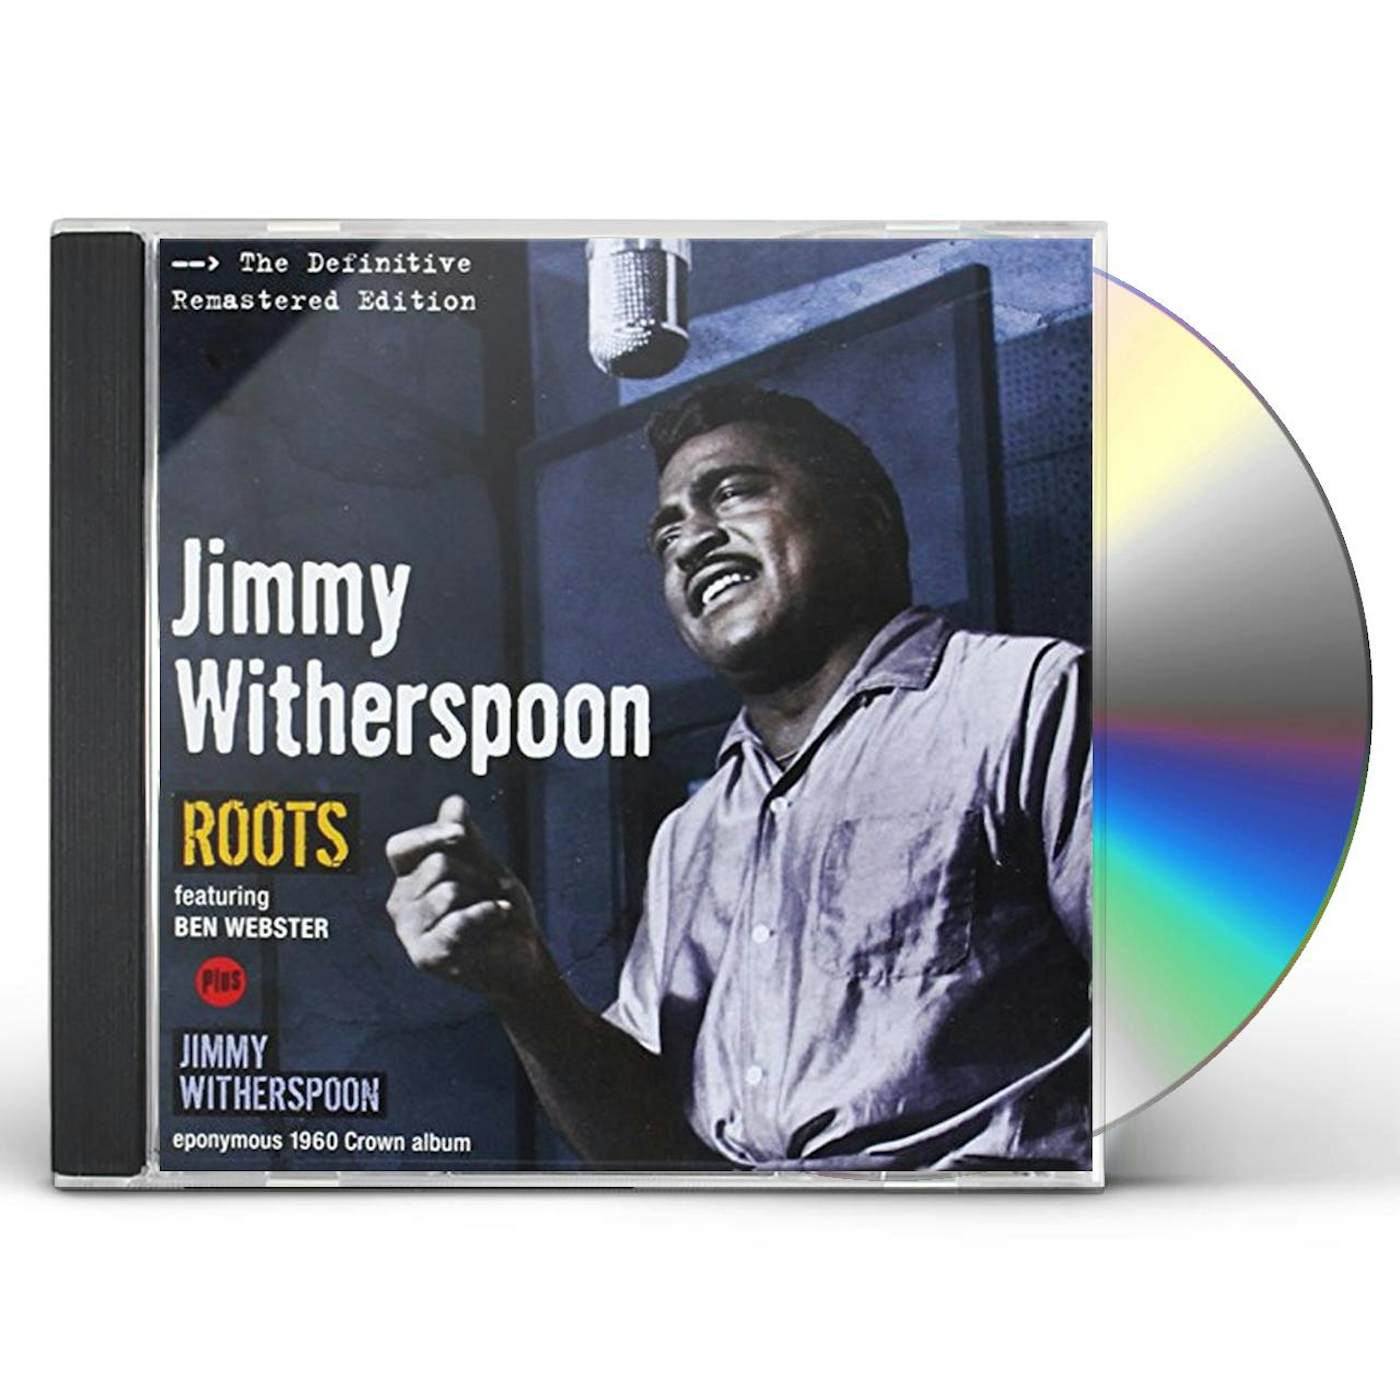 ROOTS + JIMMY WITHERSPOON CD